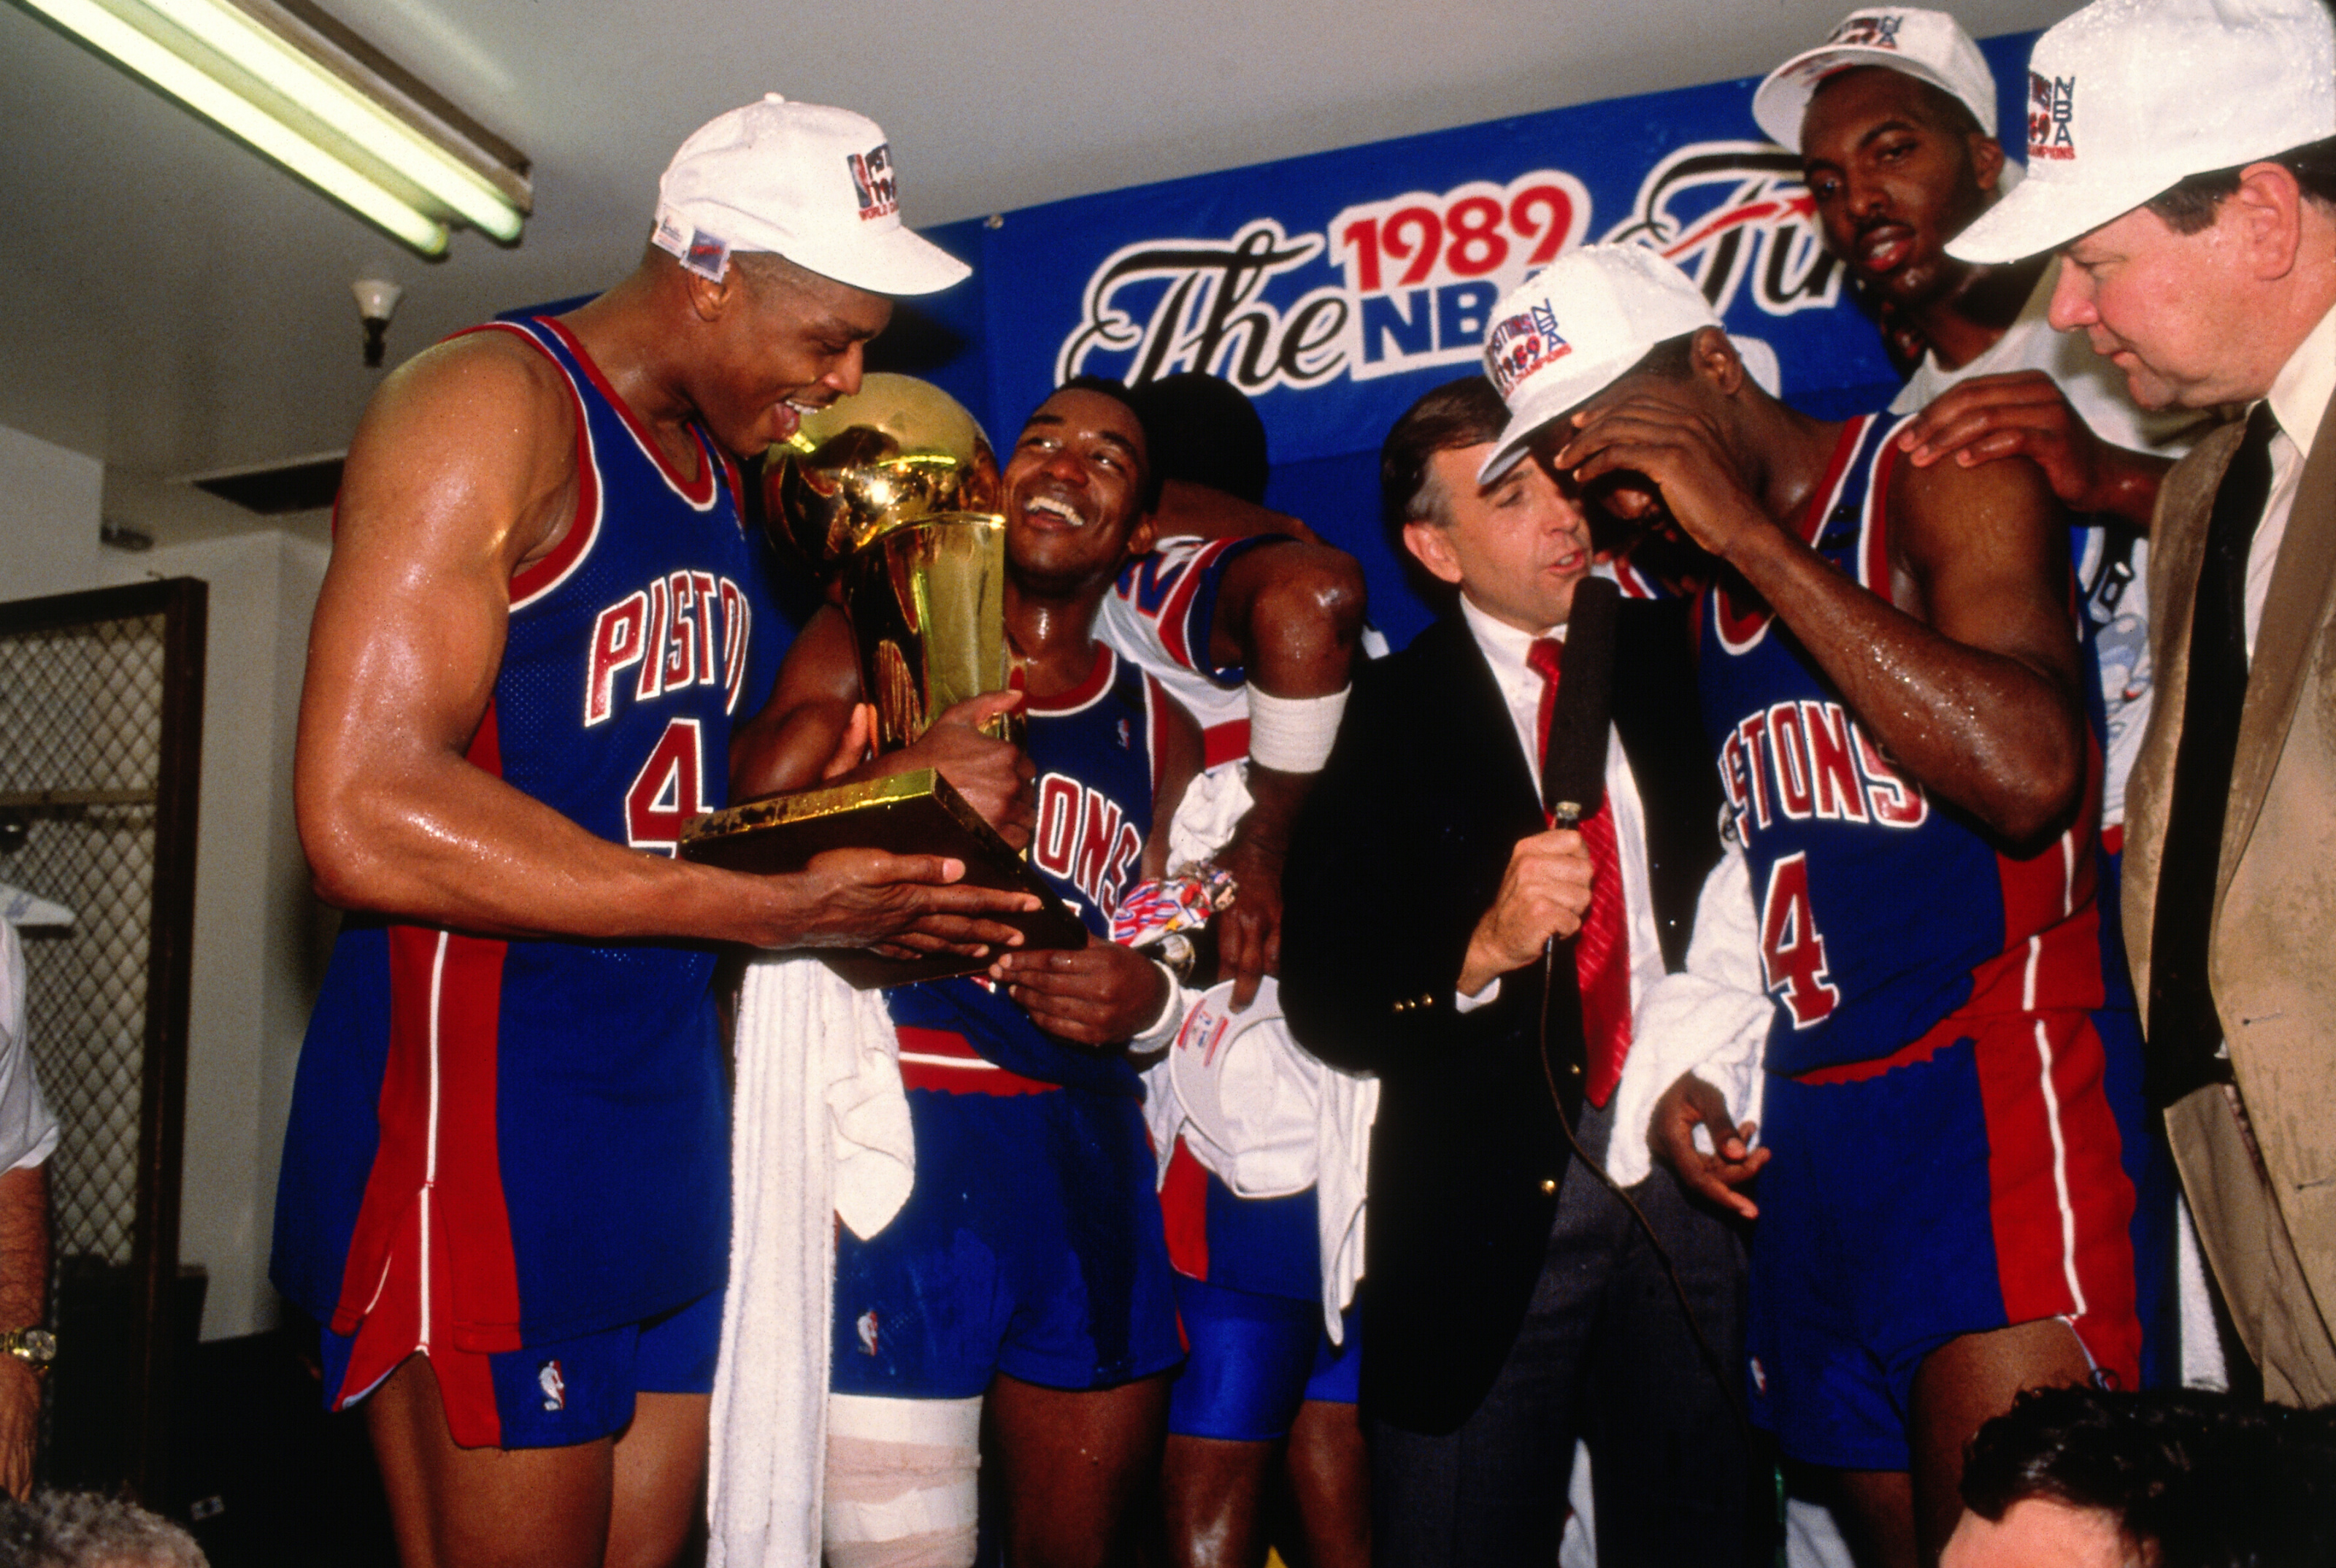 Detroit Pistons - Joe D sealed his Finals MVP in '89 with